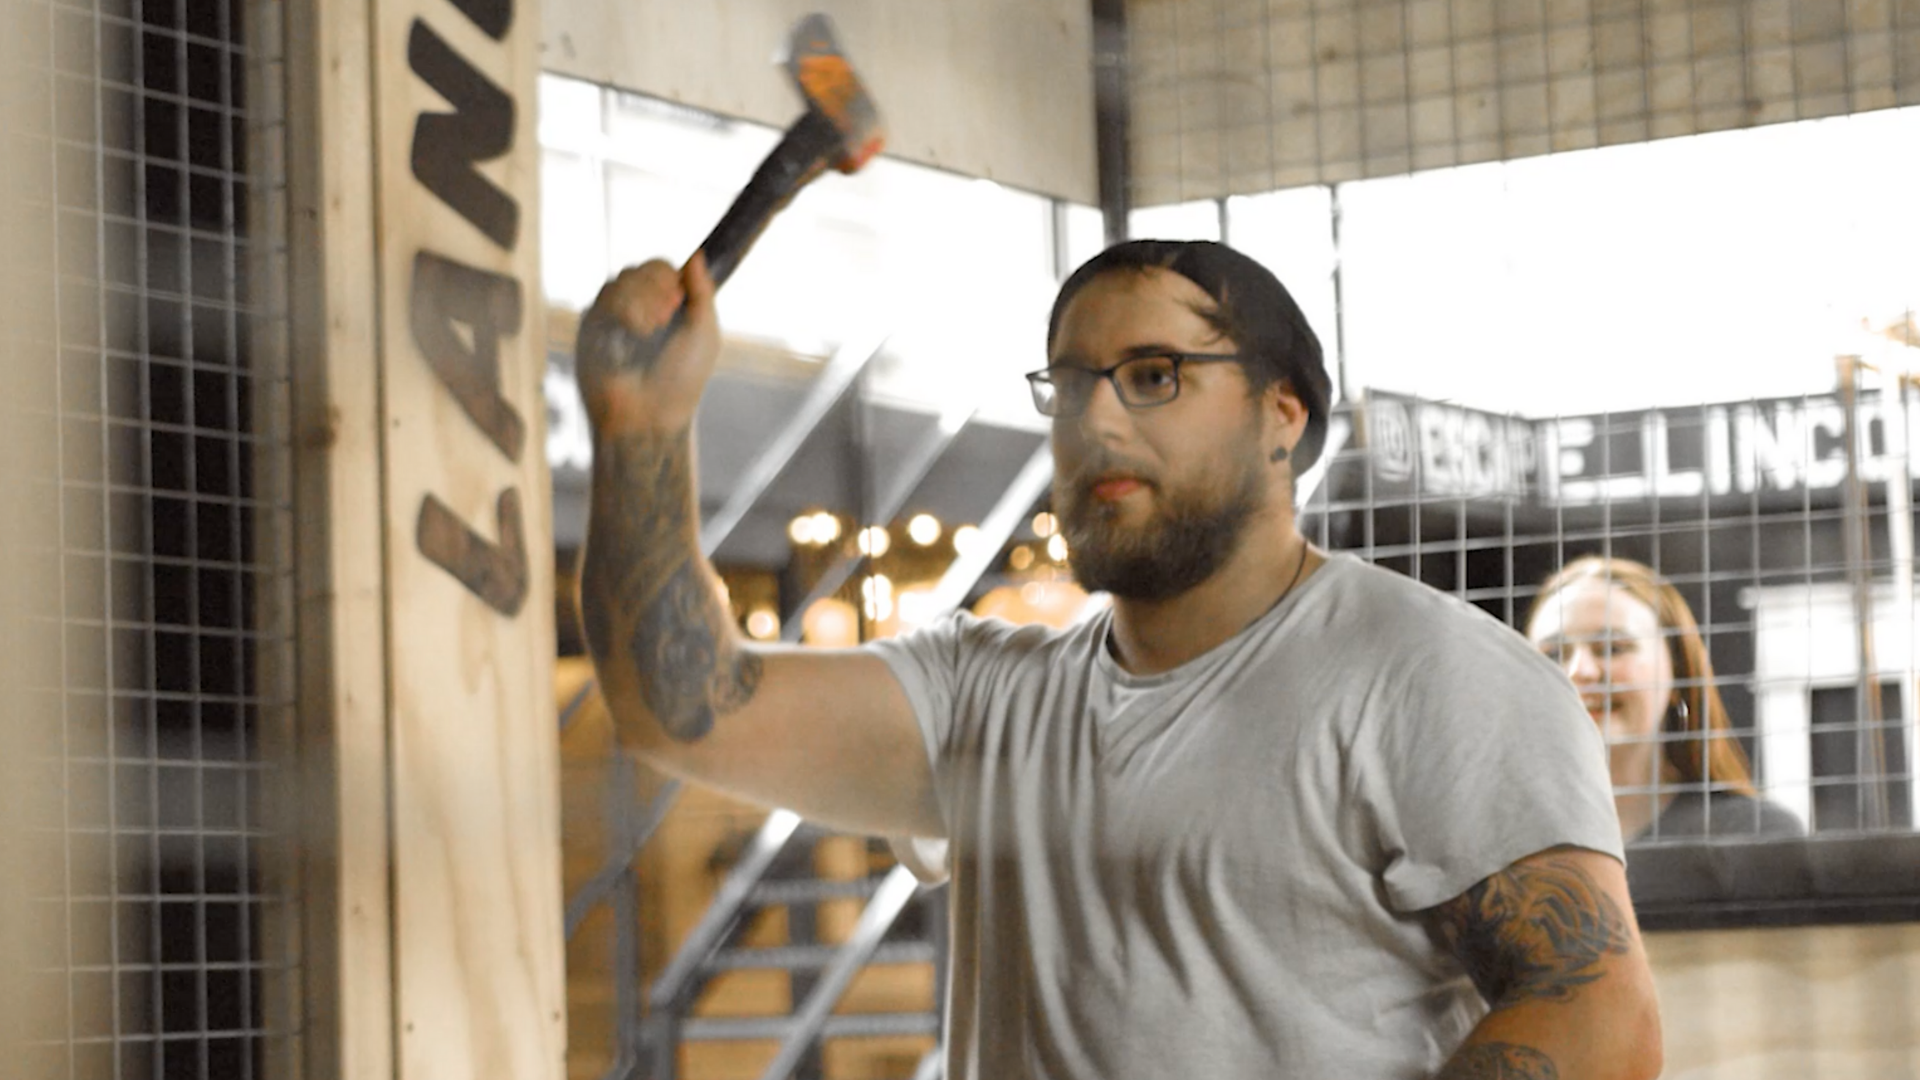 Someone axe throwing in Lincoln